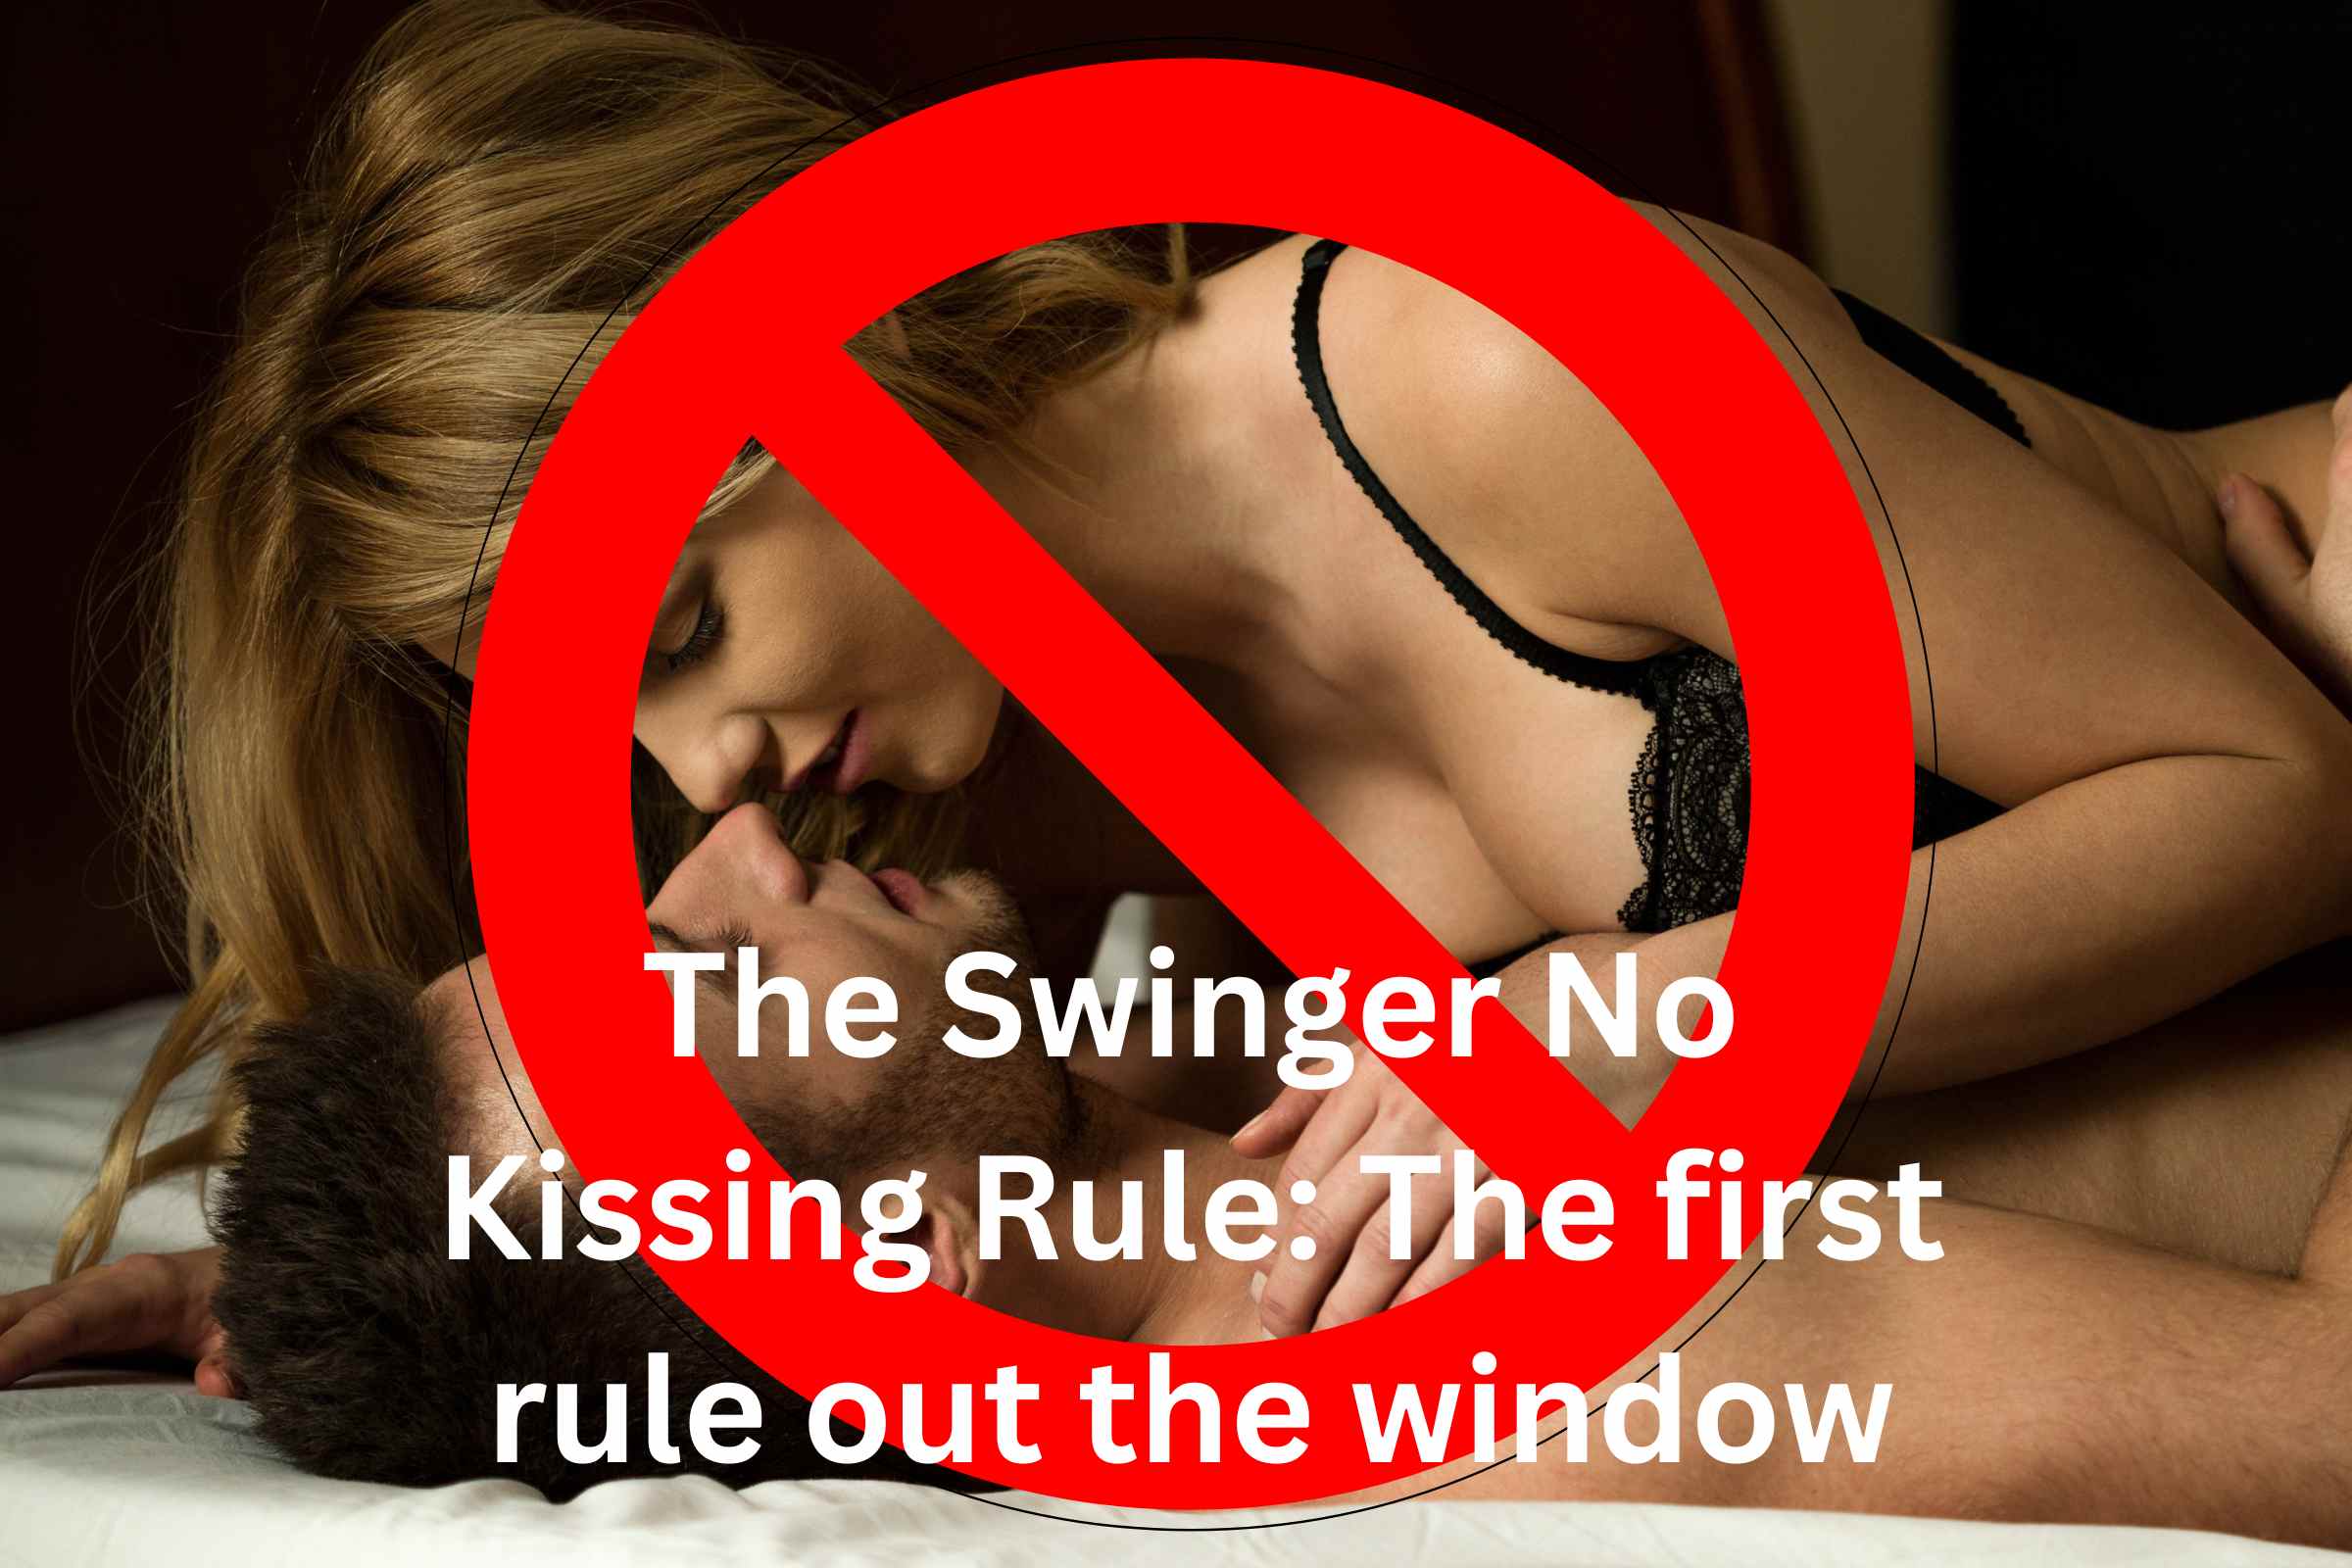 2023 The Swinger No Kissing Rule The first rule out the window photo